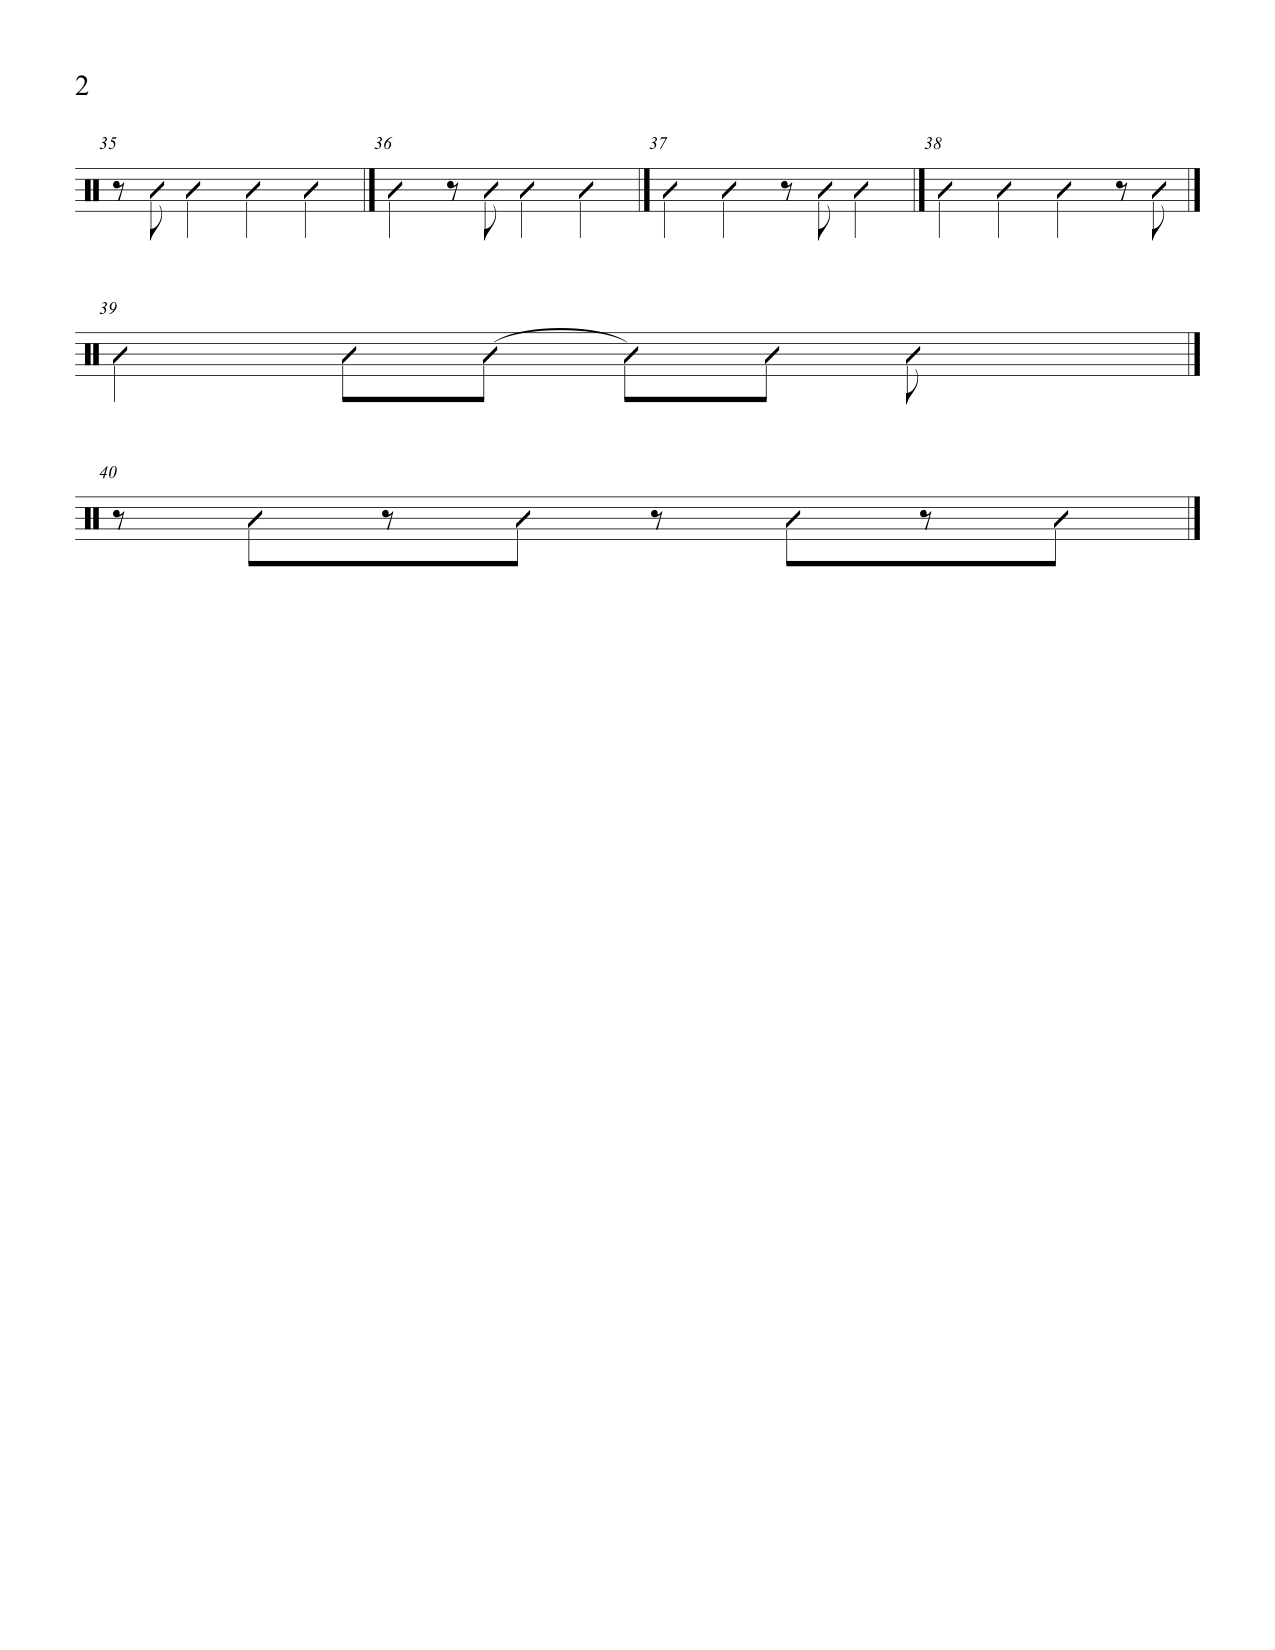 Simple Beginner's Rhythms with 8ths and rests